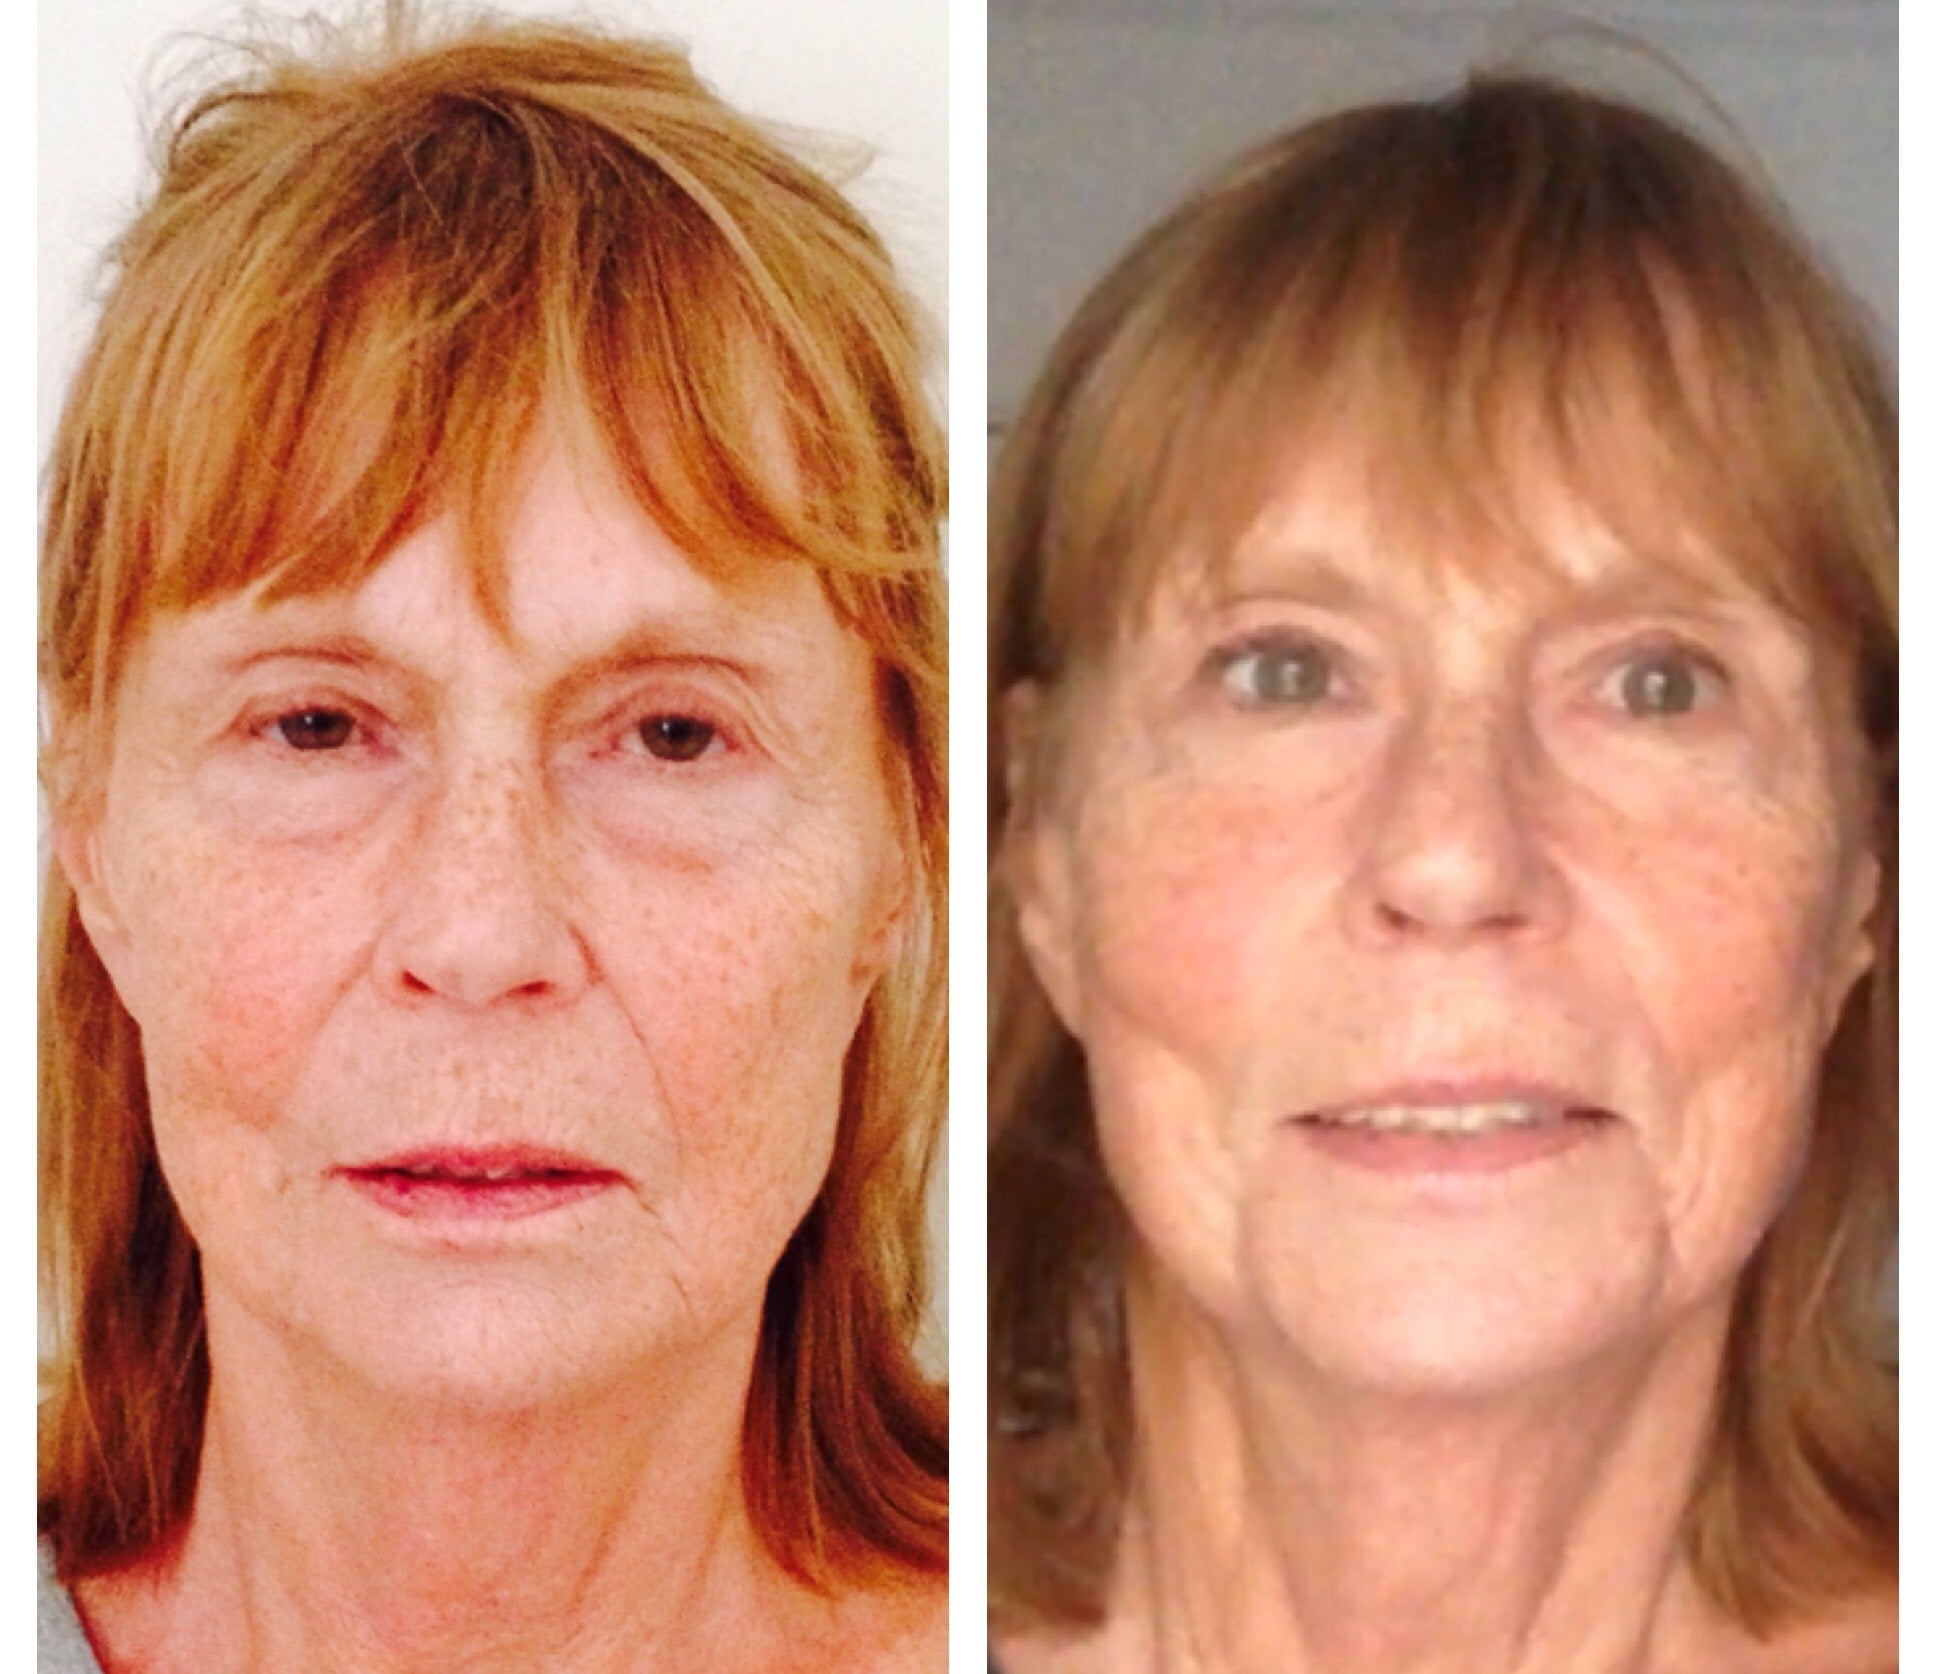 6 week antiaging case study for microcurrent and LED (and massage of course!)